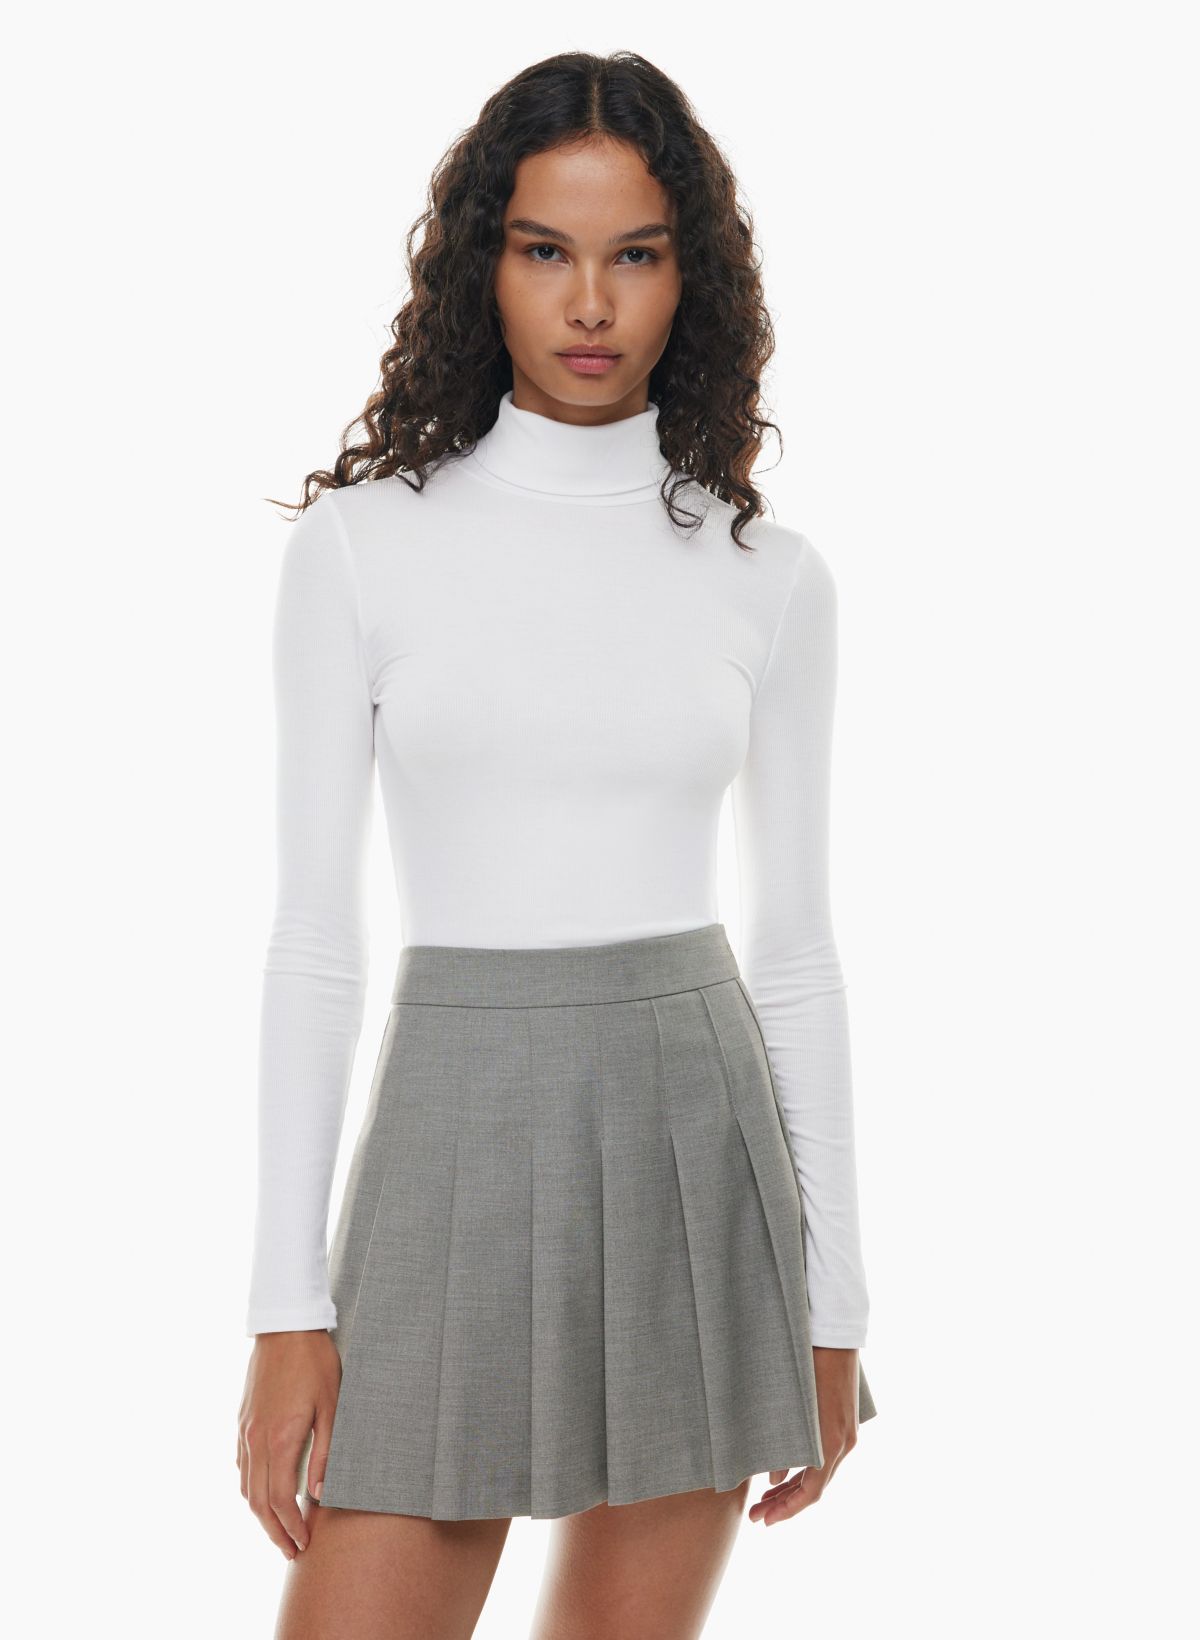 Shop Solid Athleisure Top with Half Zippered High Neck Online